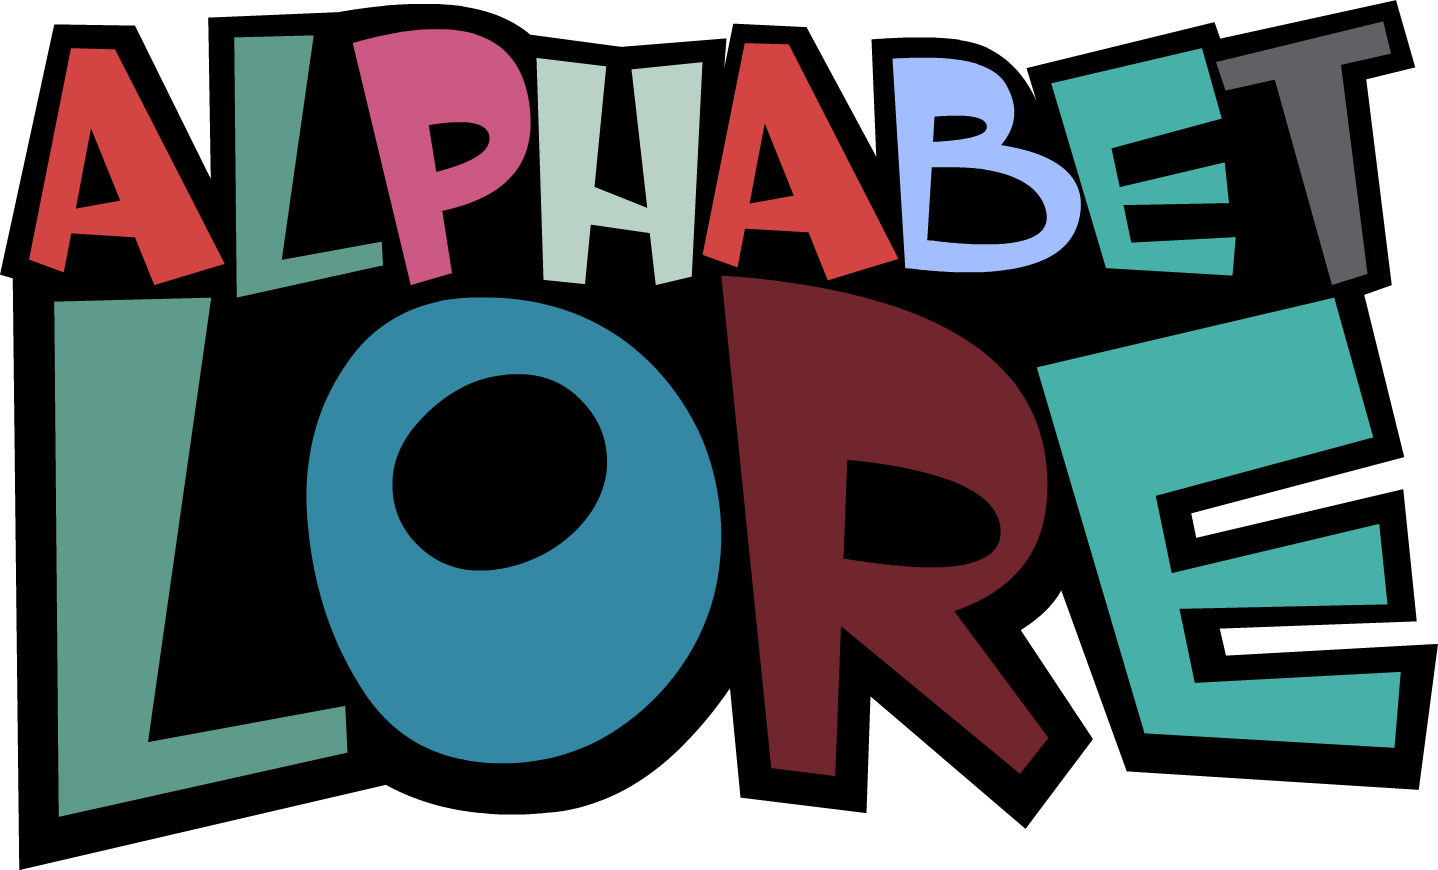 New posts in lore - unofficial alphabet lore community Community